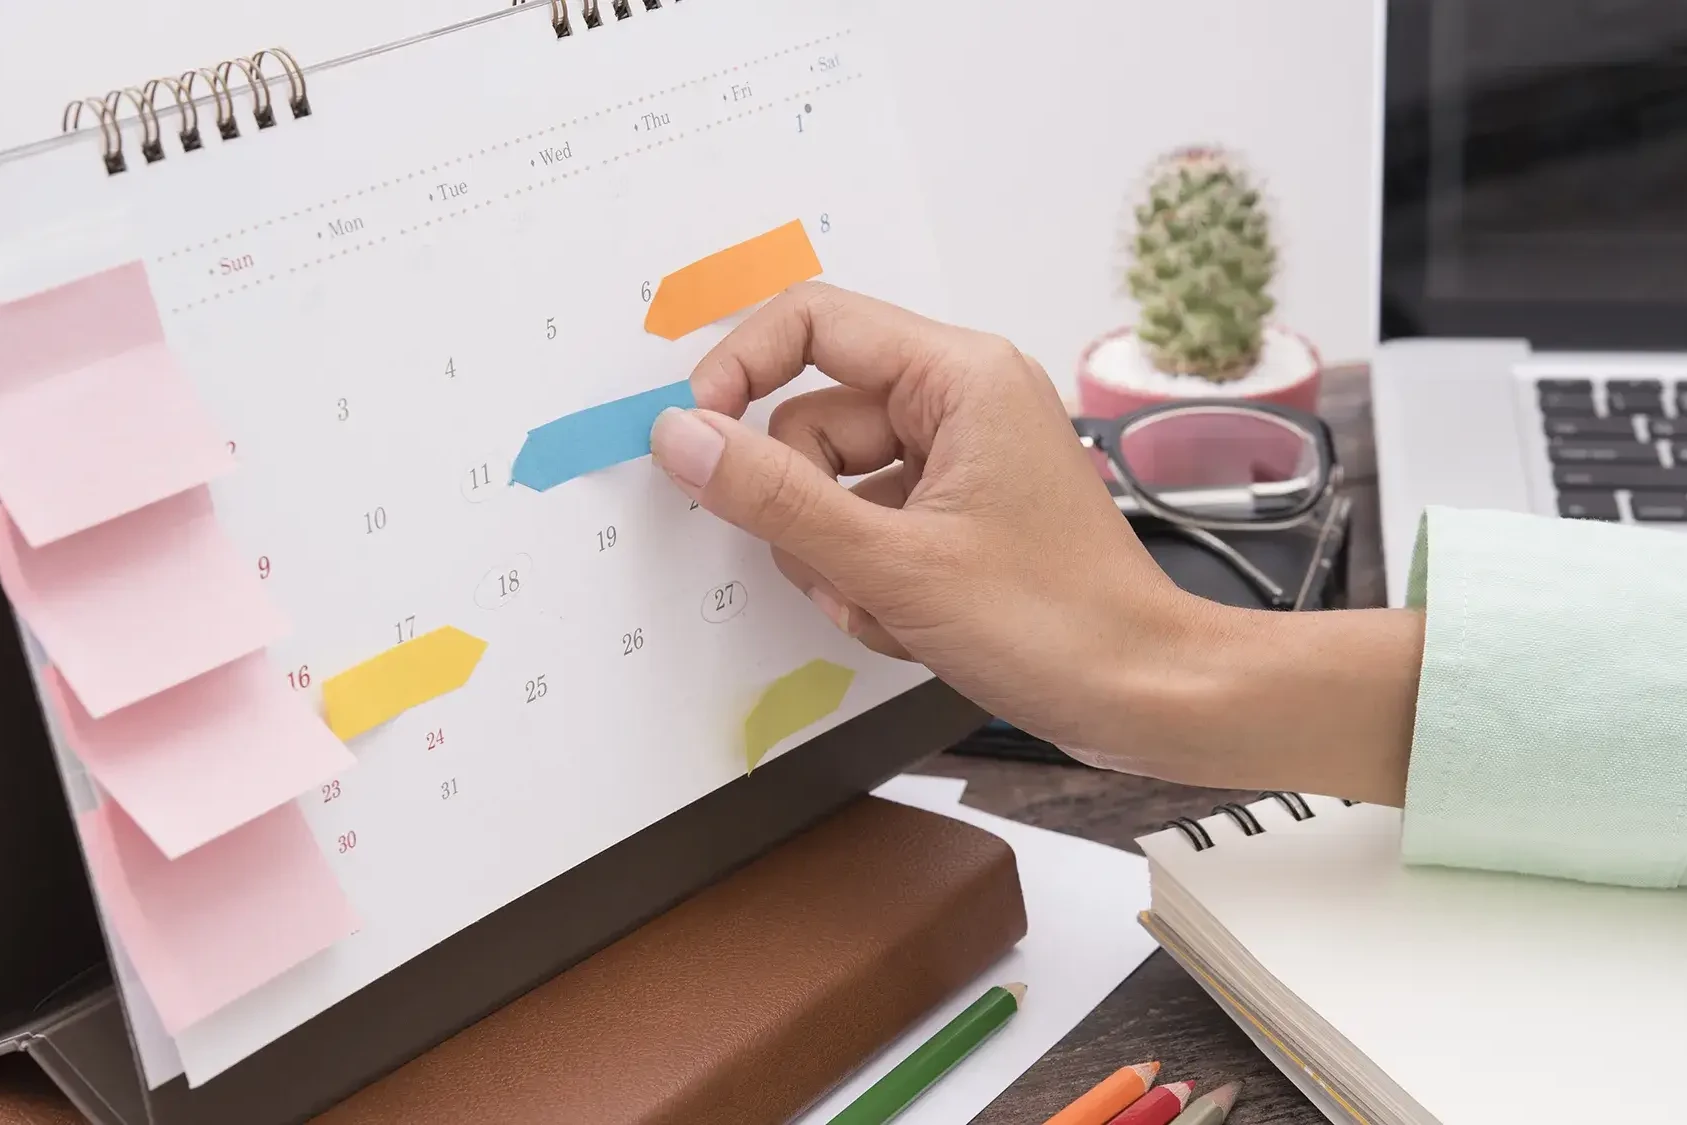 Planning a last-minute team building event with calendar and sticky marks